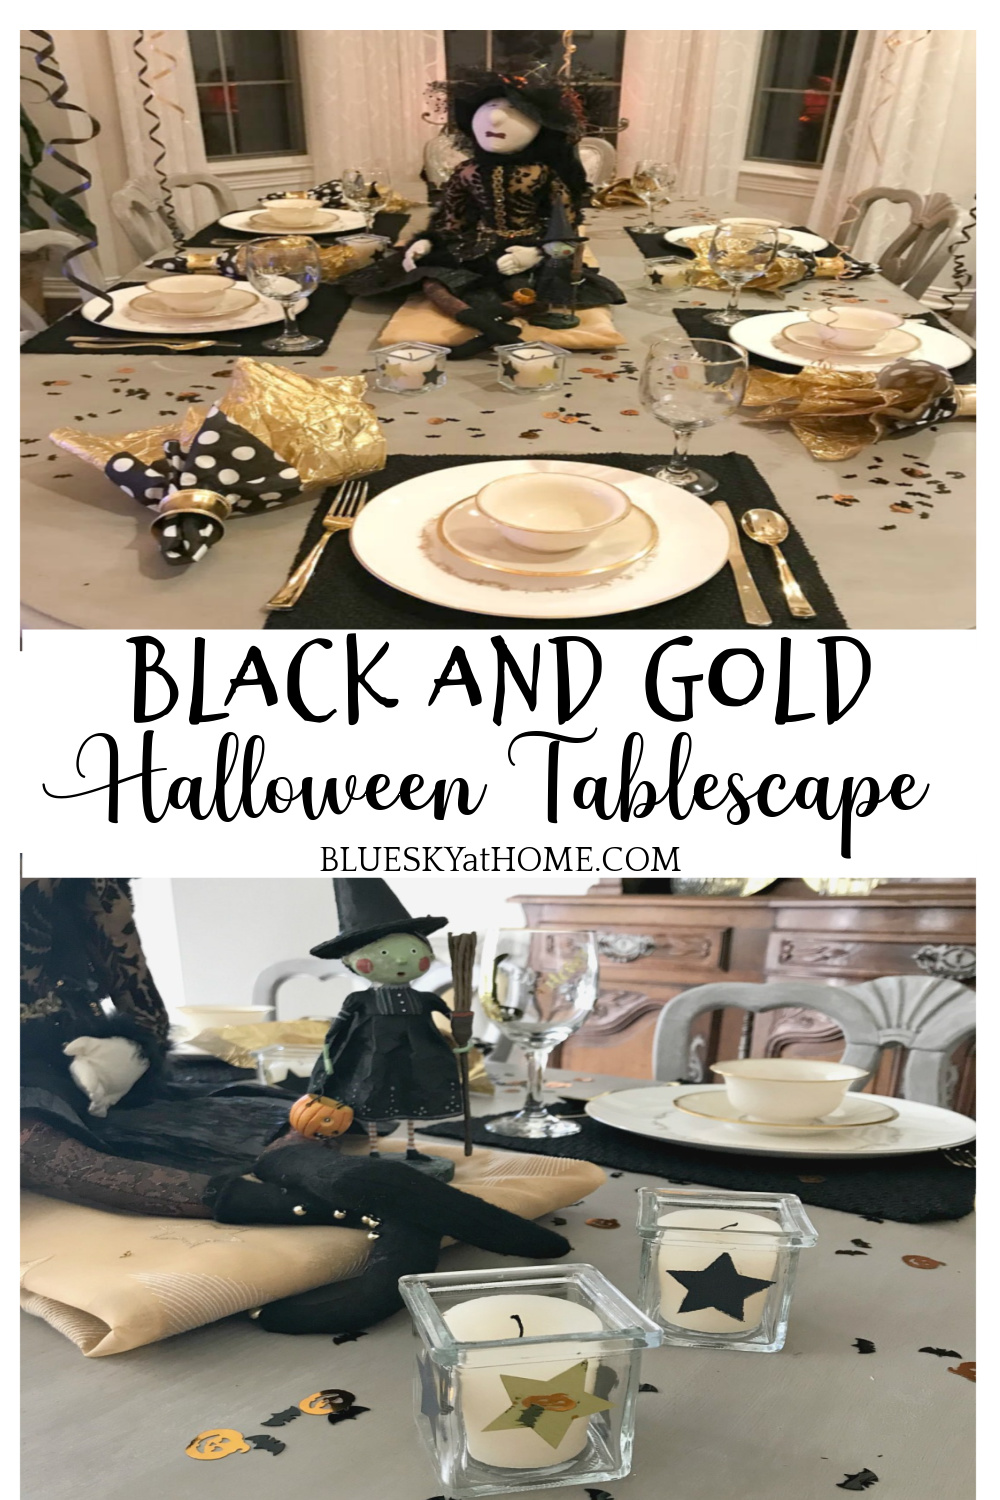 Black and Gold Halloween Tablescape - Bluesky at Home